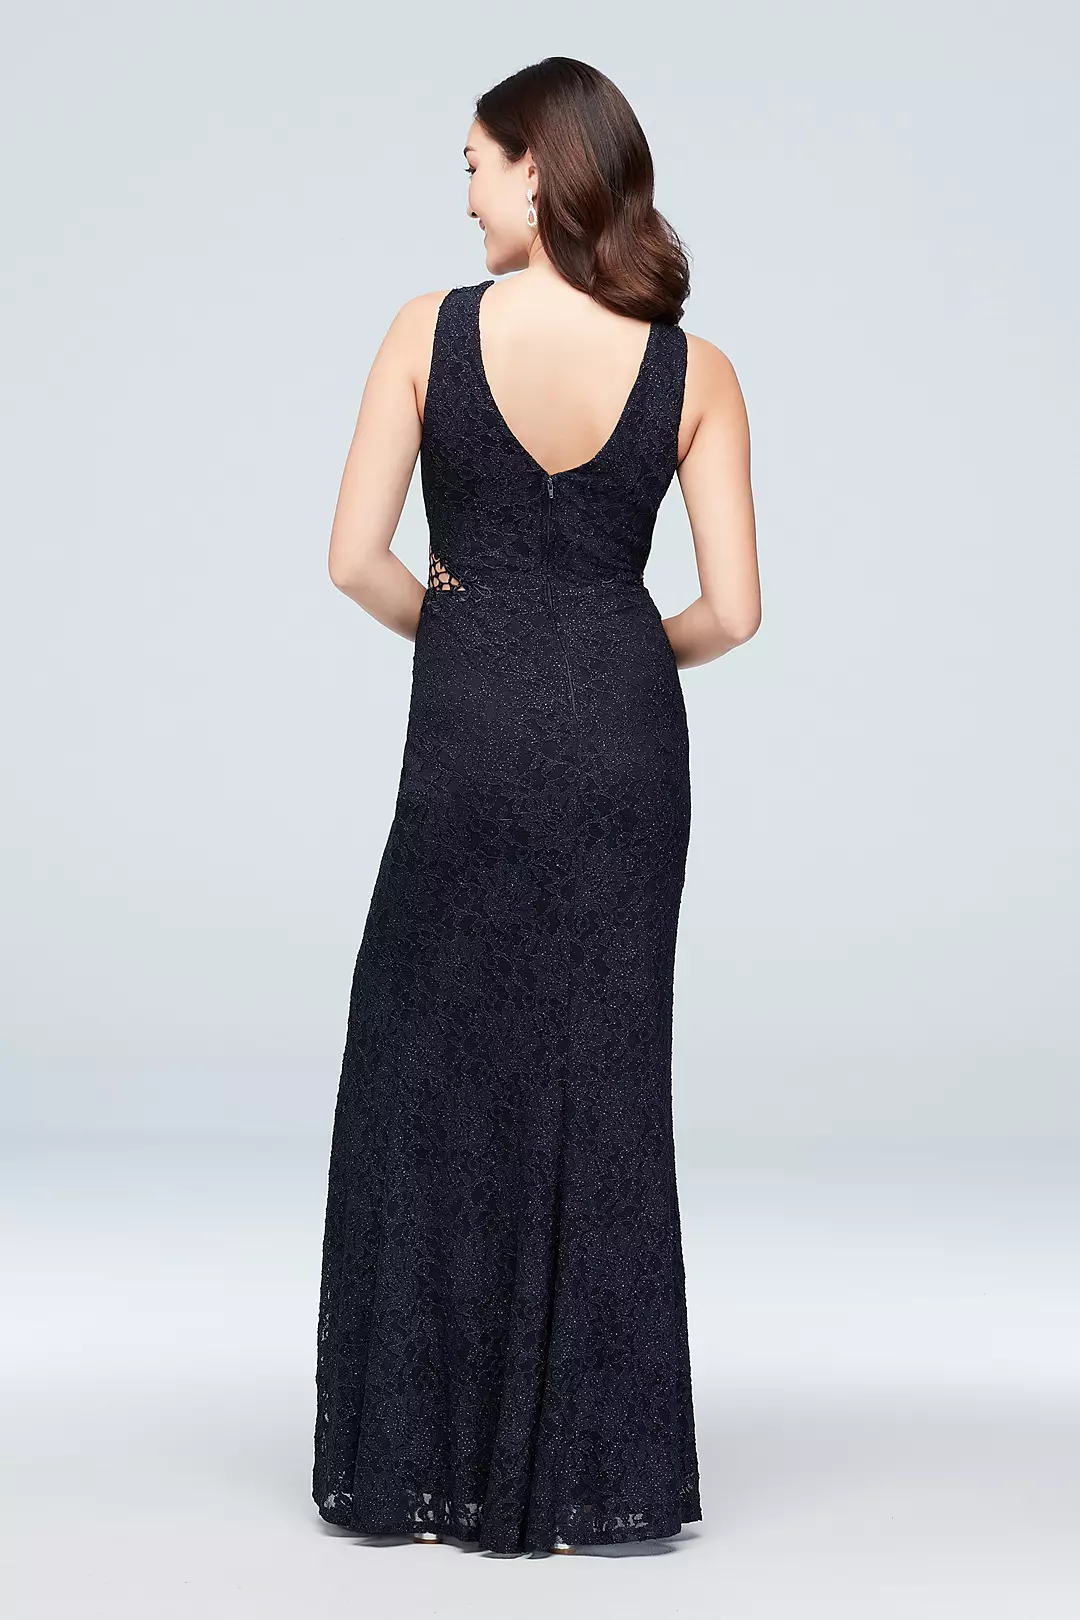 Glitter Lace Sheath Gown with Geometric Neckline Image 2